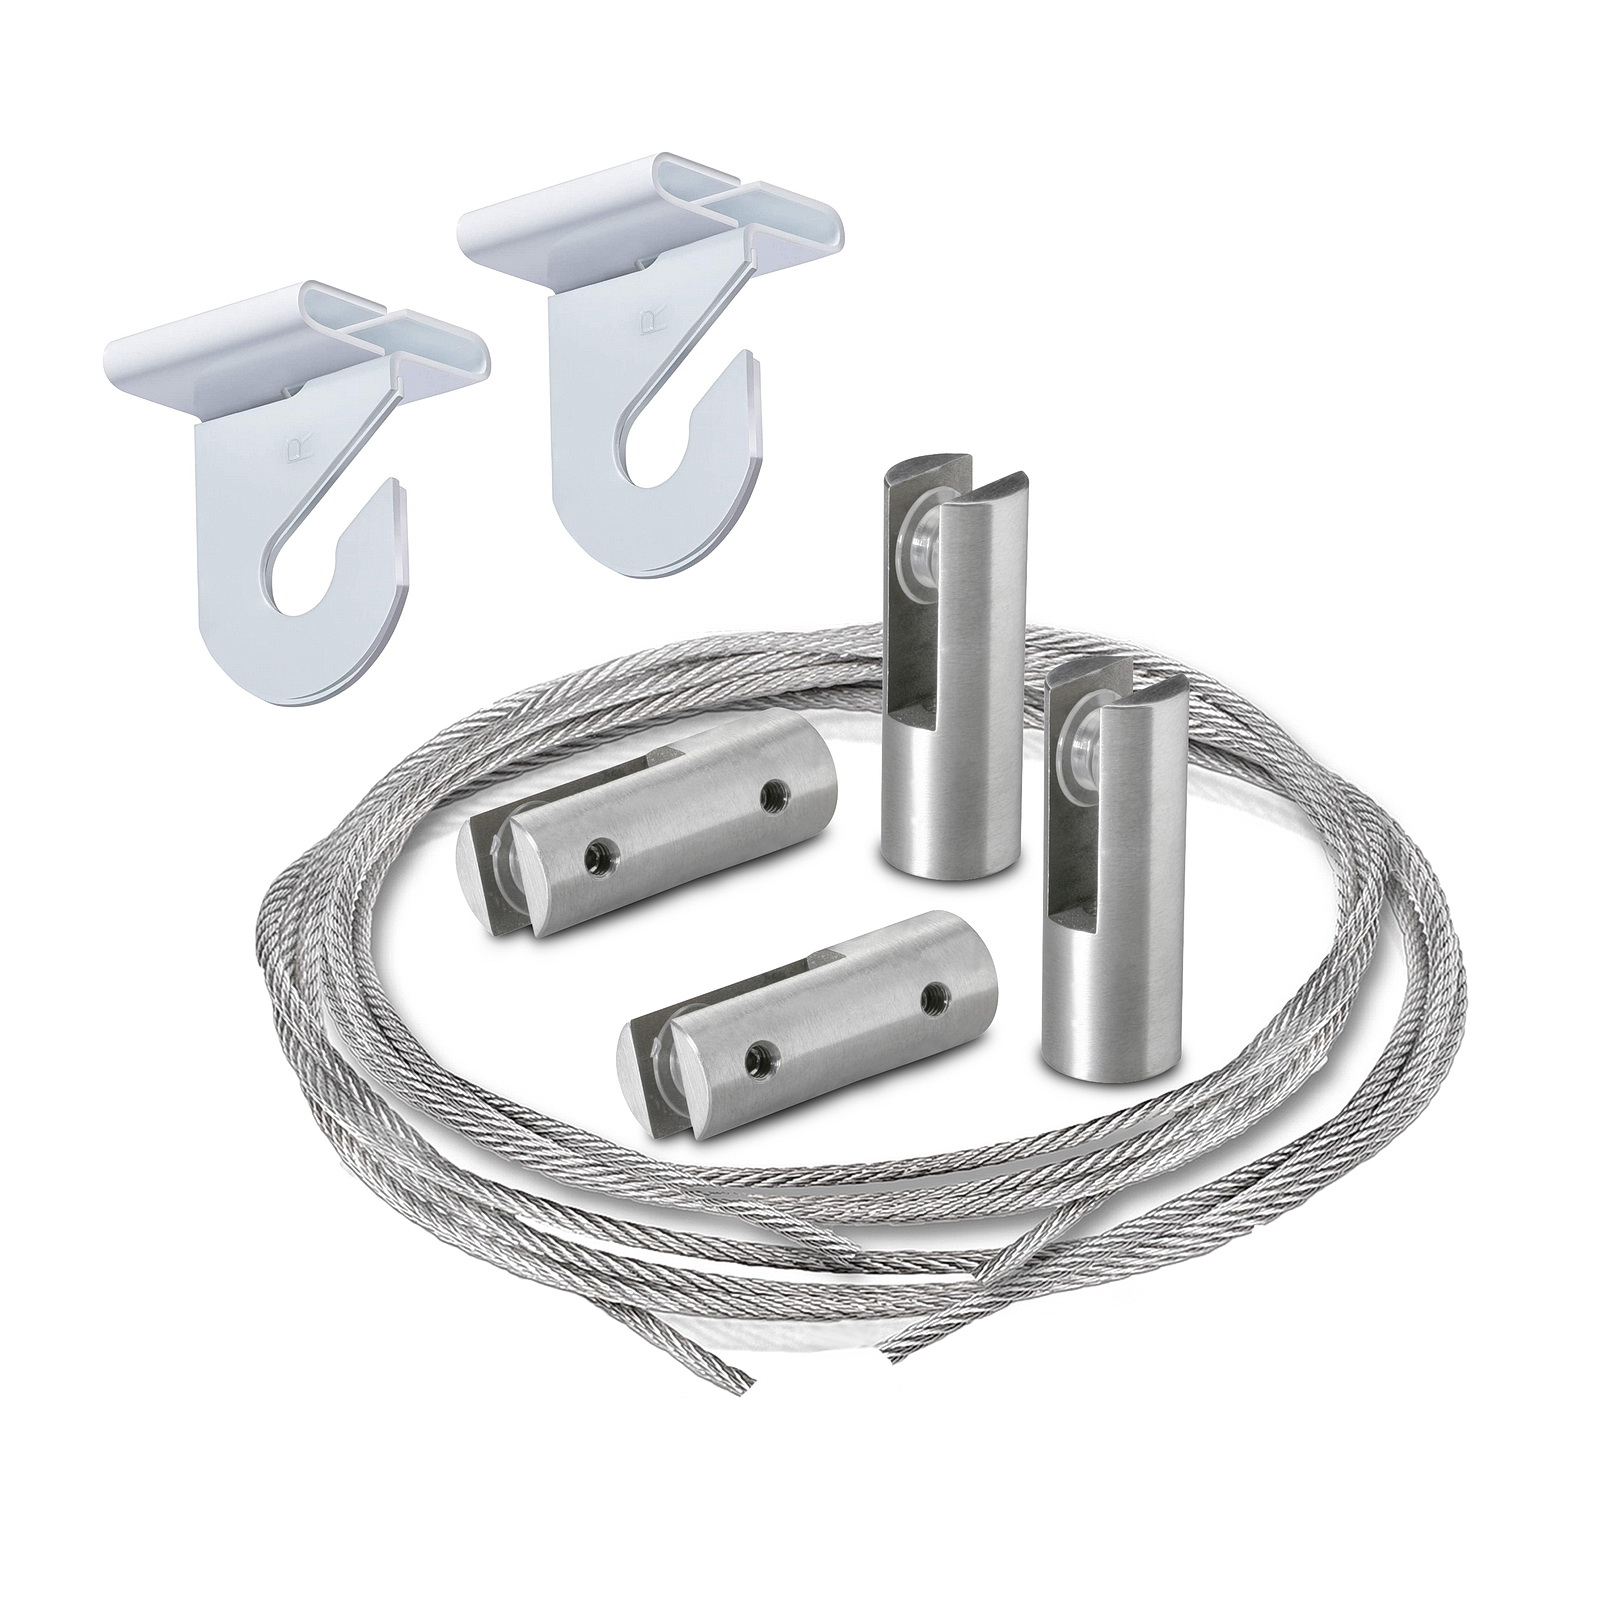 2 Pieces of 196'' Stainless Steel Satin Brushed Suspended Cable Kits for 1/4'' Thick Material (2 Full Sets) - 1/16'' Diameter Cable